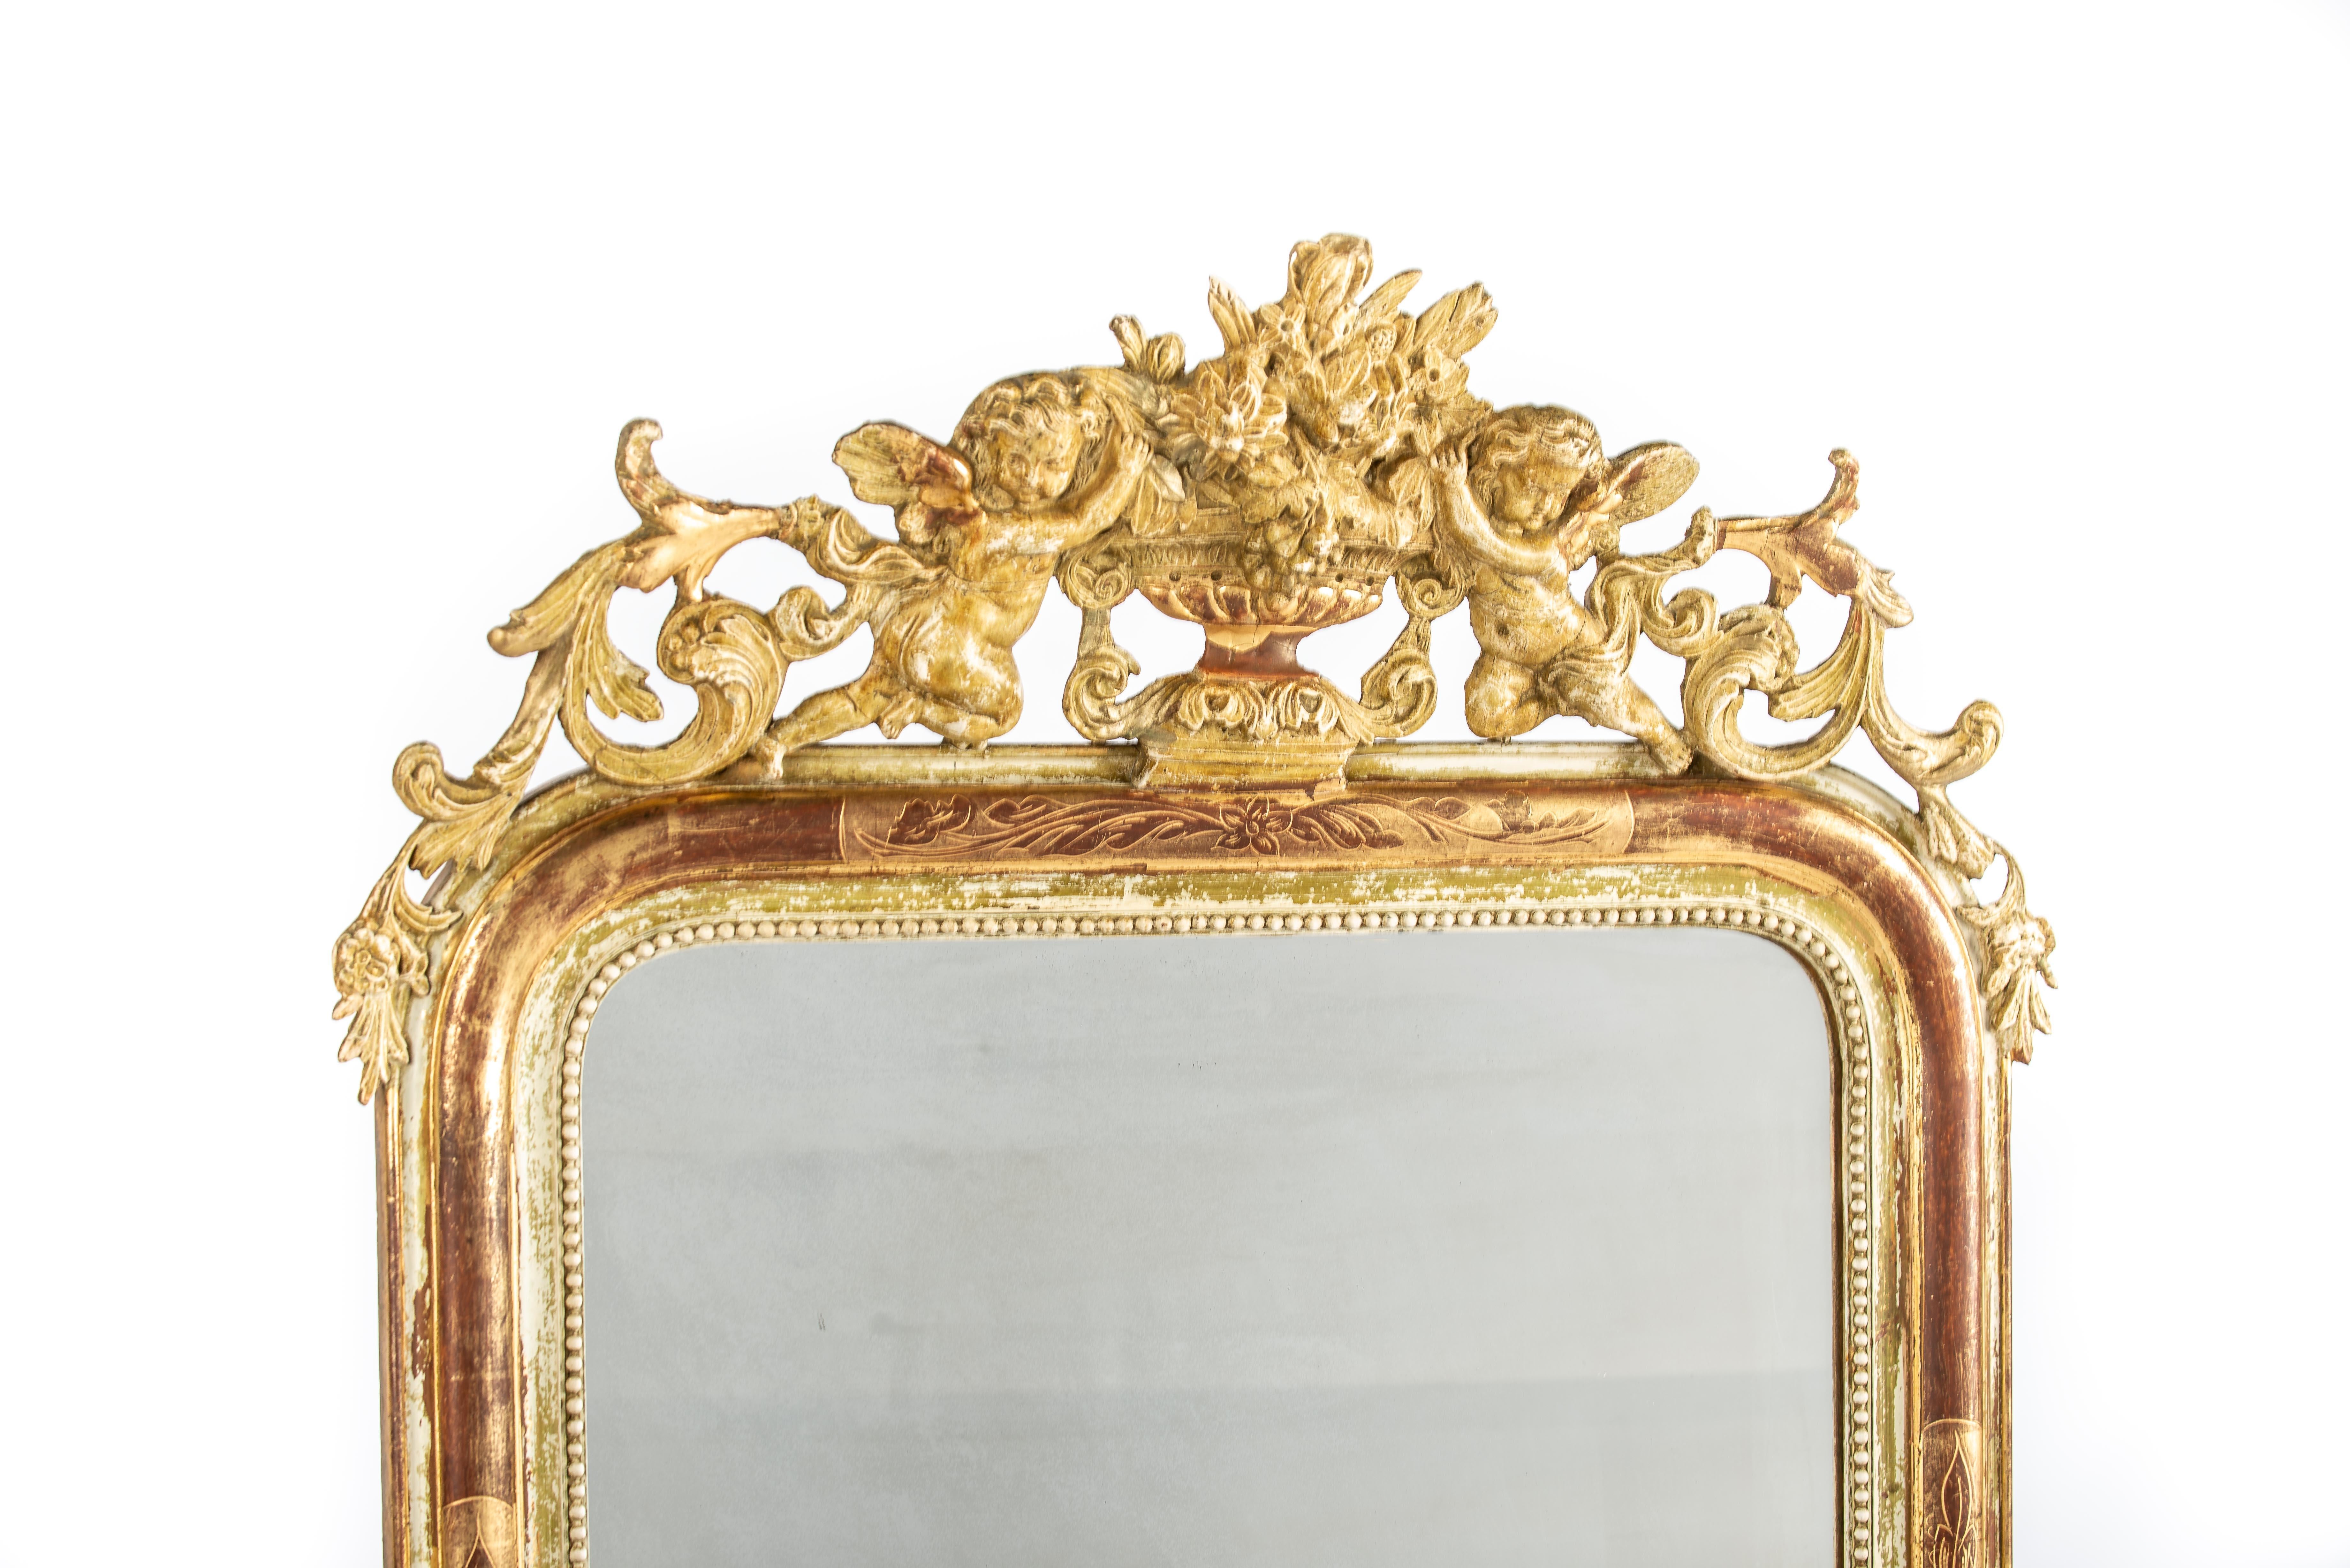 Offered here is a beautiful antique French Louis Philippe mirror originating from the Alsace region and crafted around 1870. The mirror features the distinctive rounded top corners typical of the Louis Philippe style. At the top, it is adorned with